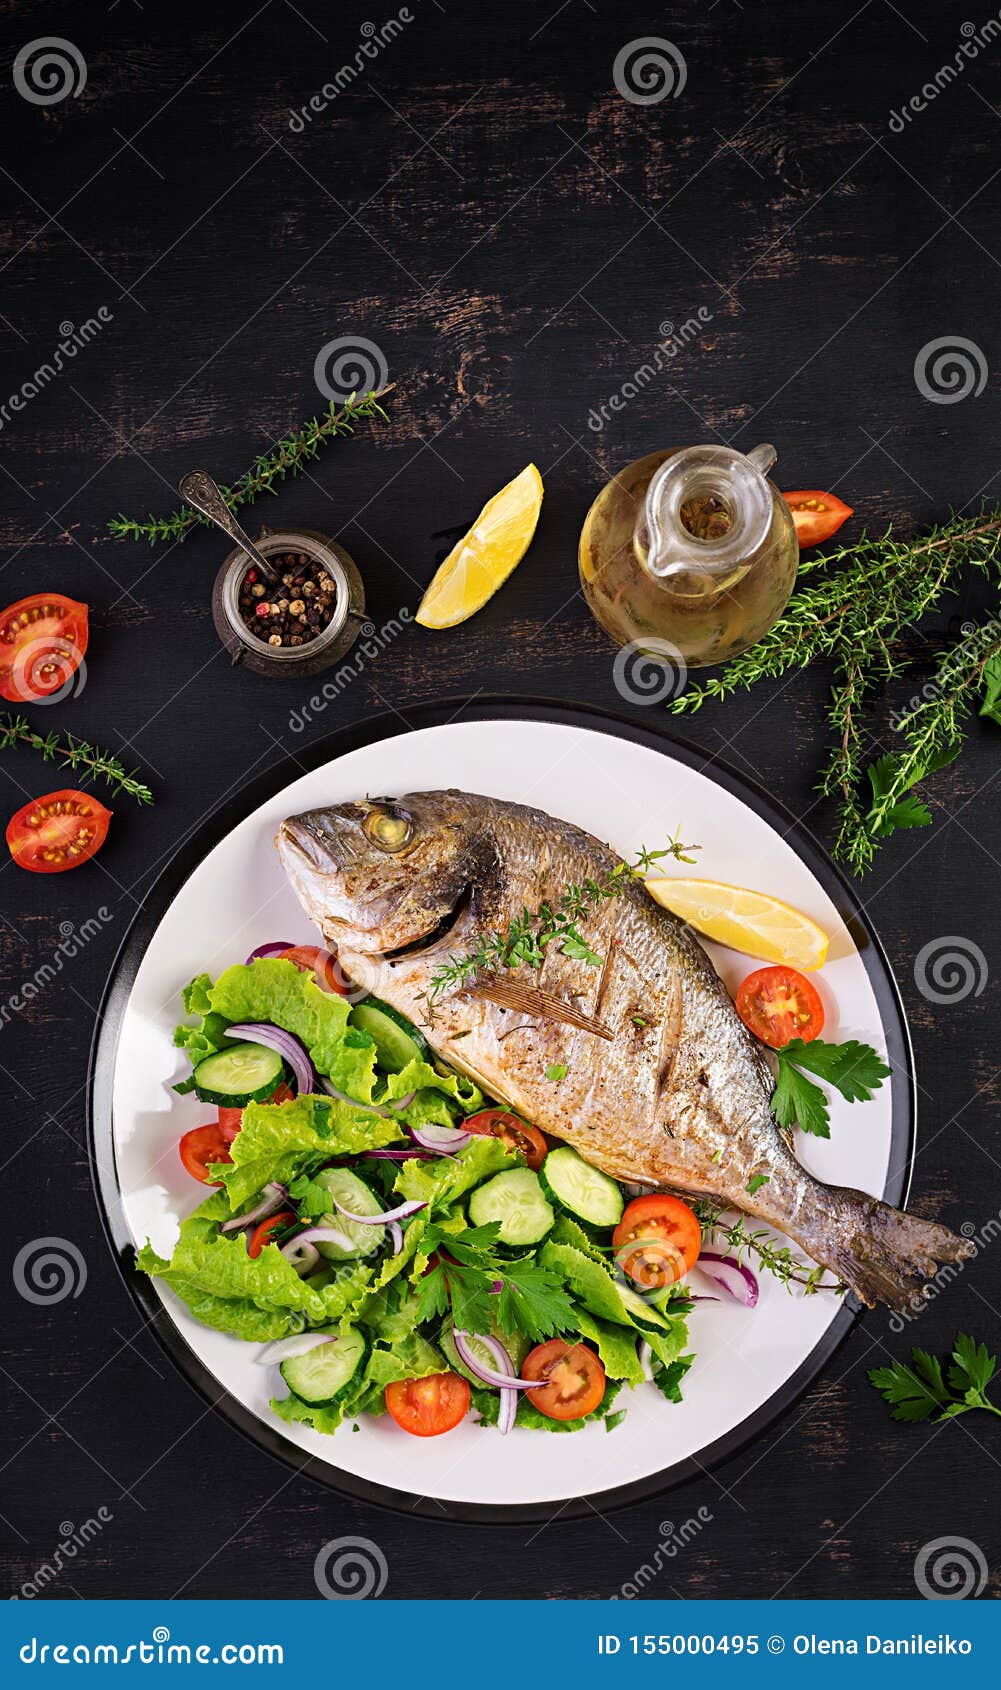 front view fresh fish with lemon on dark background meal salad